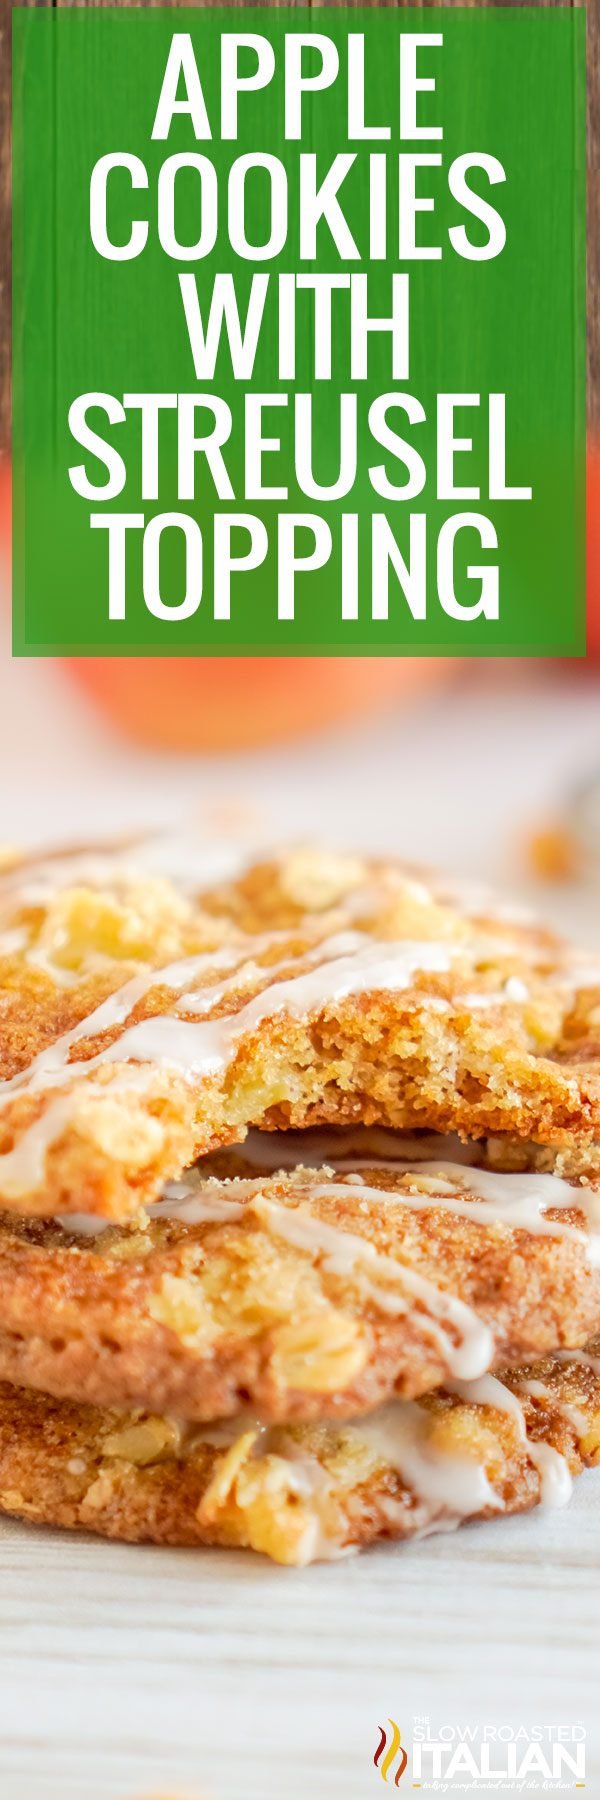 apple cookies with streusel topping